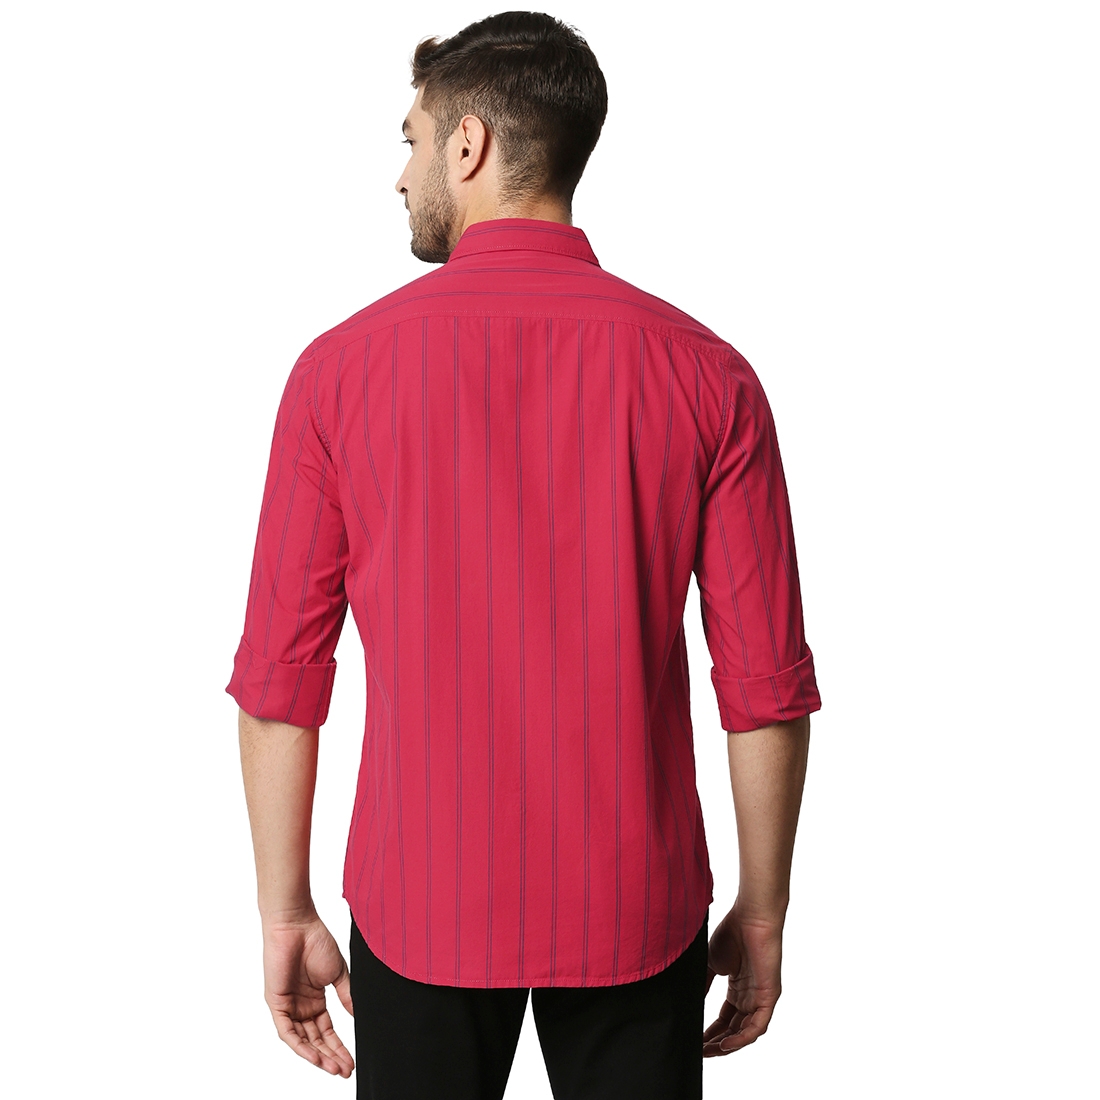 Basics | Men's Red Cotton Striped Casual Shirt 1